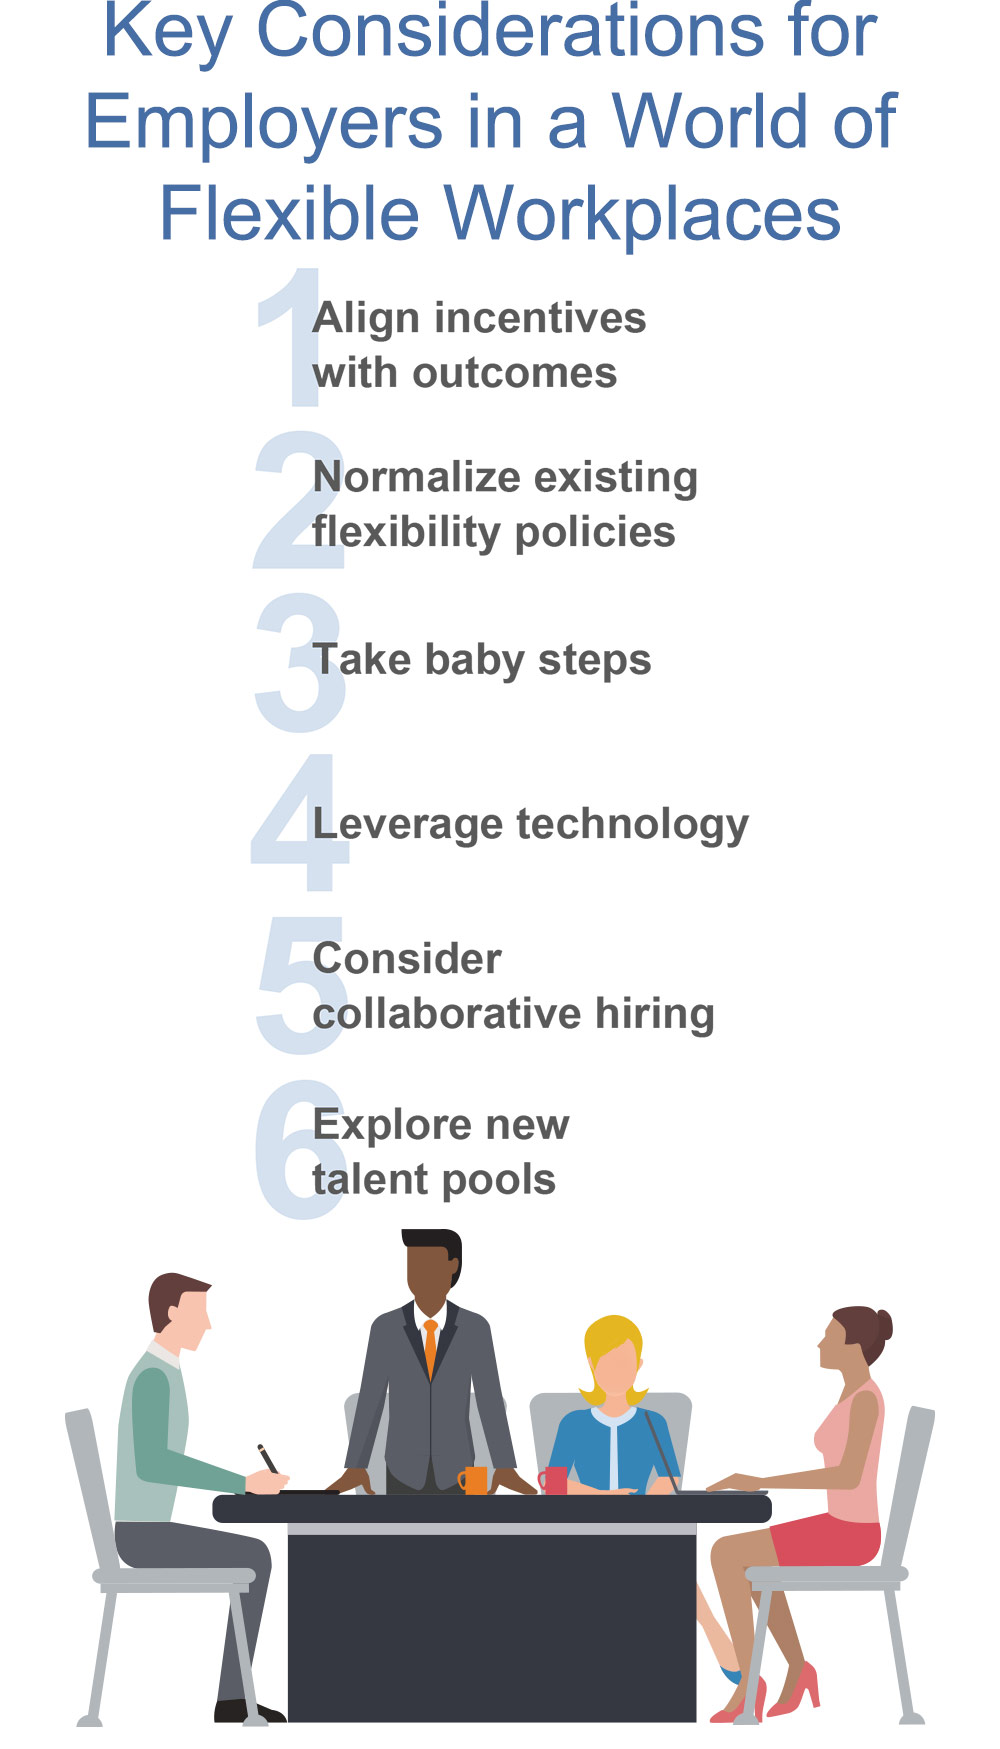 Work, for Me: Understanding Candidate Preferences for Flexibility - Infographic